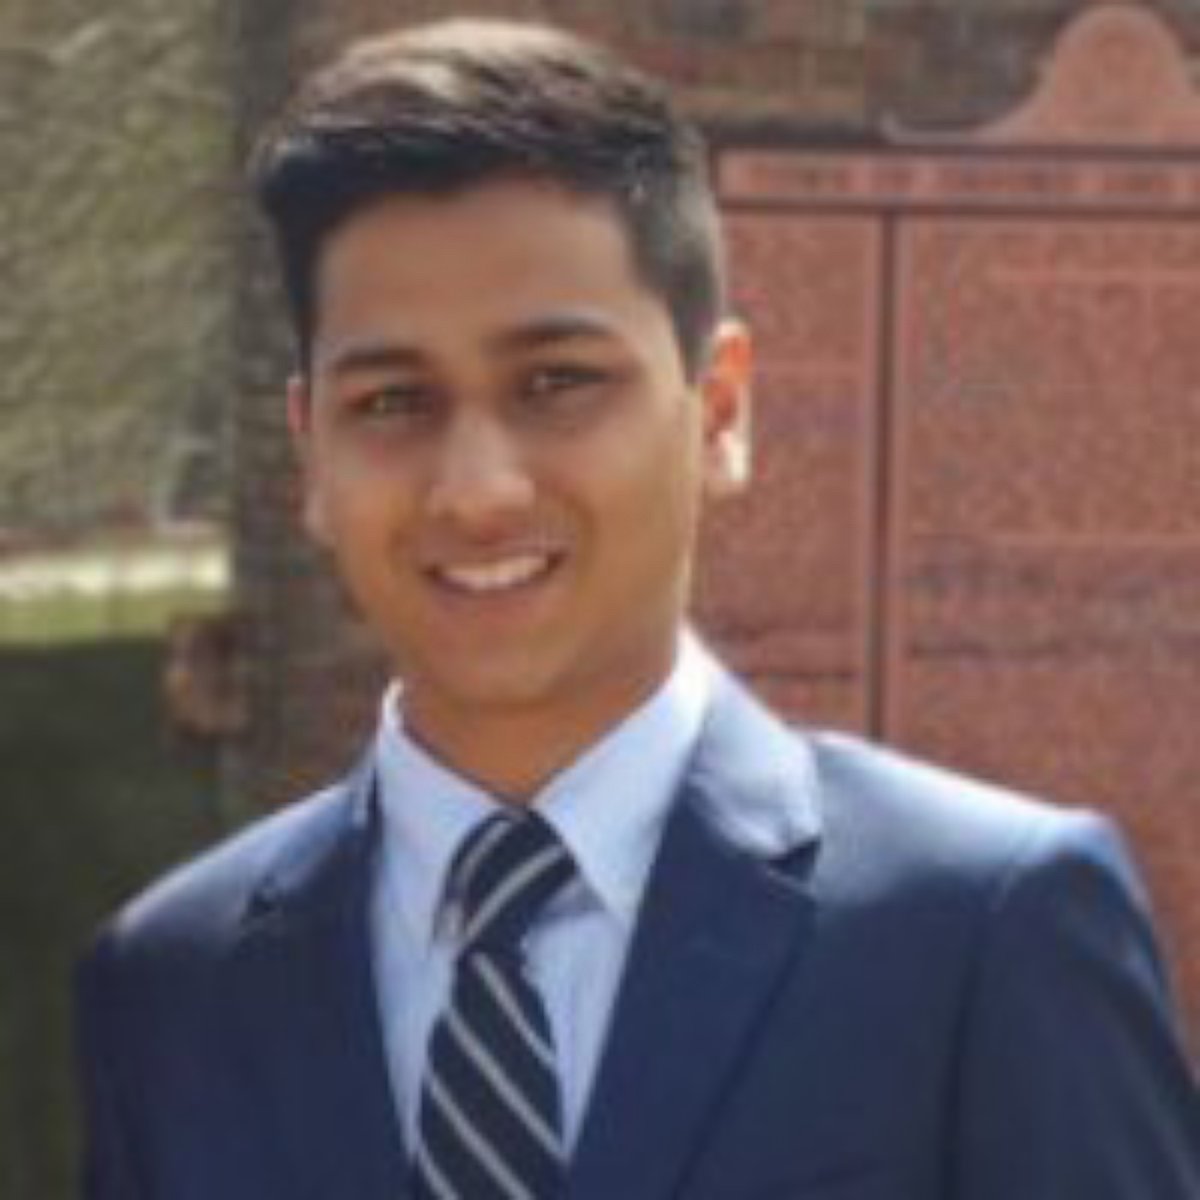 PHOTO: Faraaz Hossain is seen in this undated profile photo from his LinkedIn account.